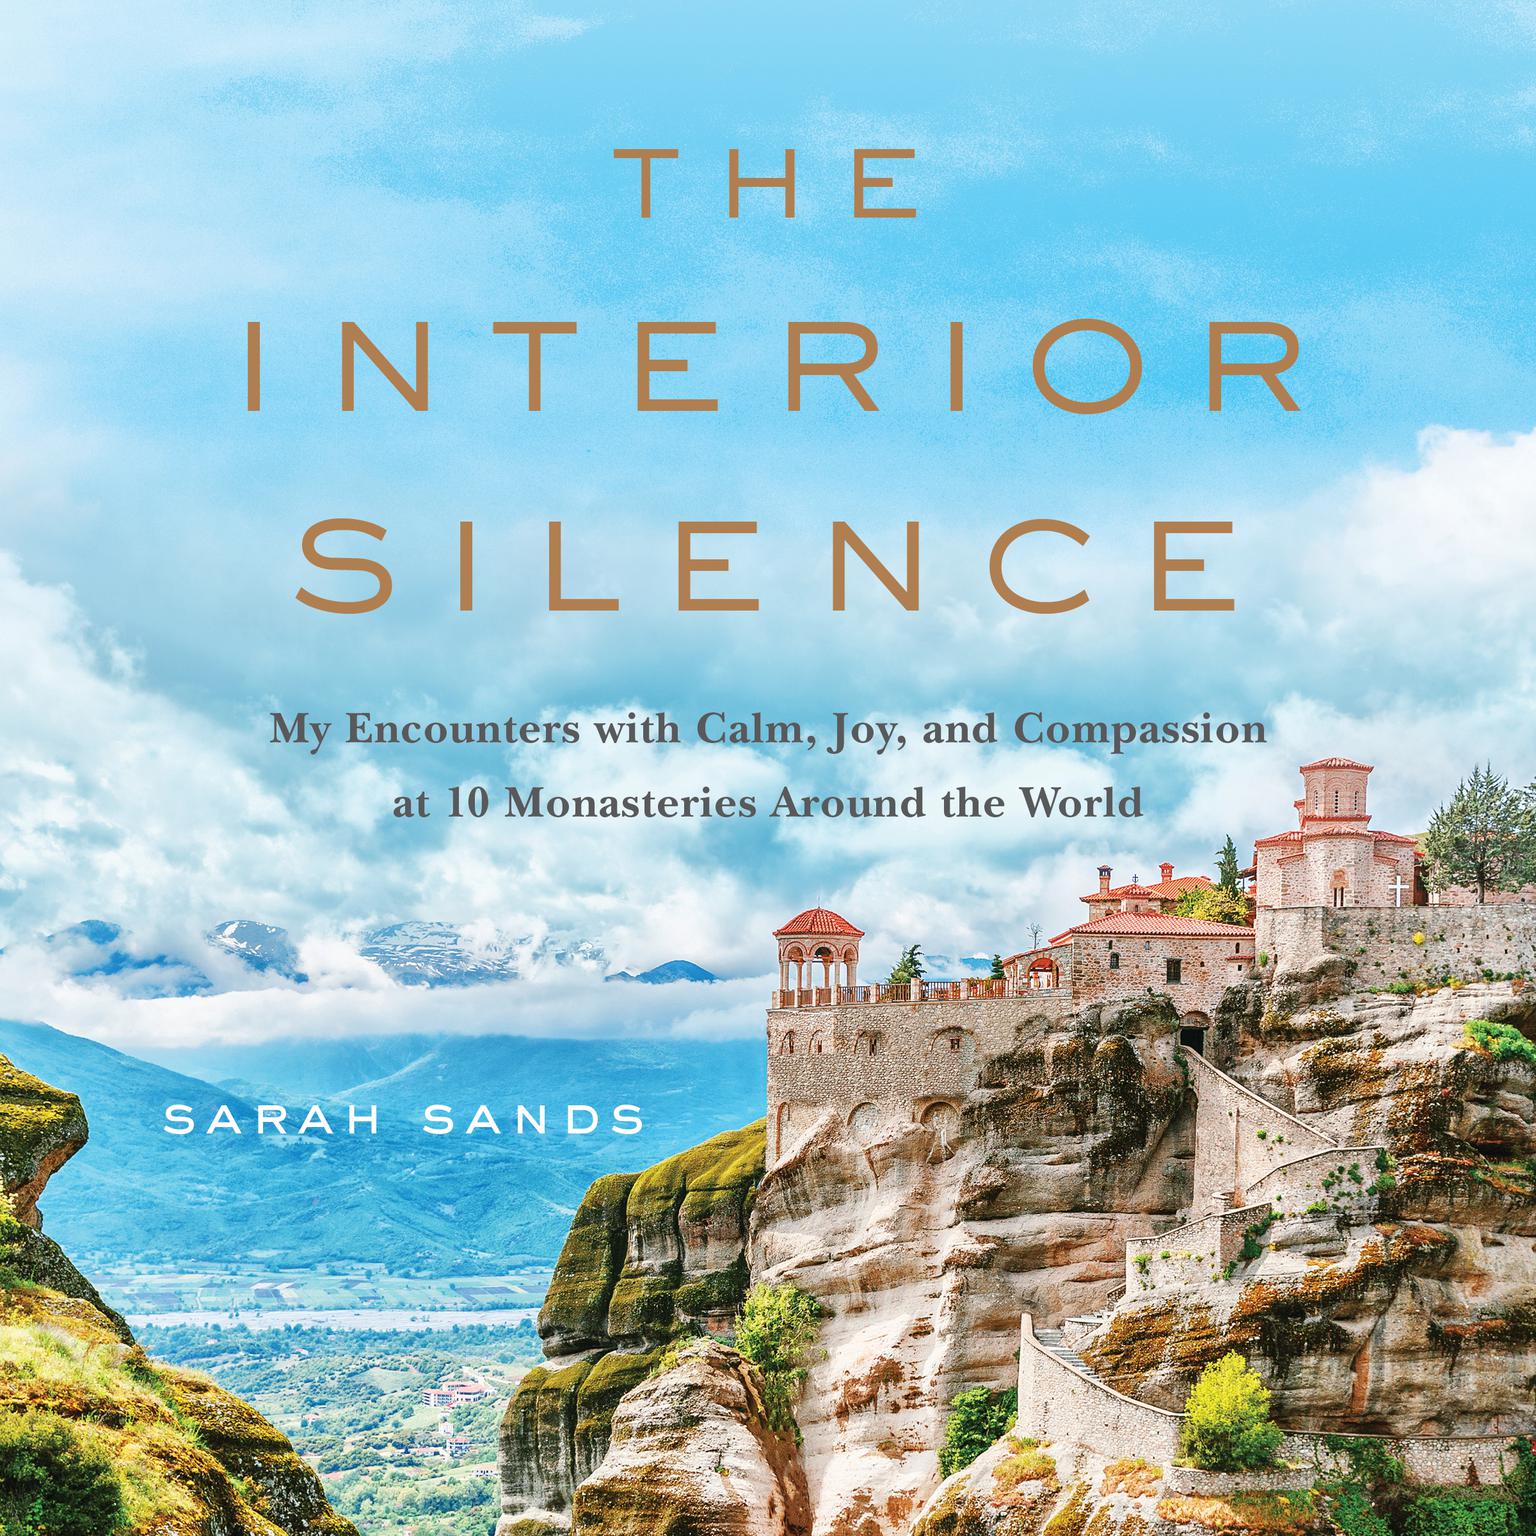 The Interior Silence: My Encounters with Calm, Joy, and Compassion at 10 Monasteries Around the World Audiobook, by Sarah Sands